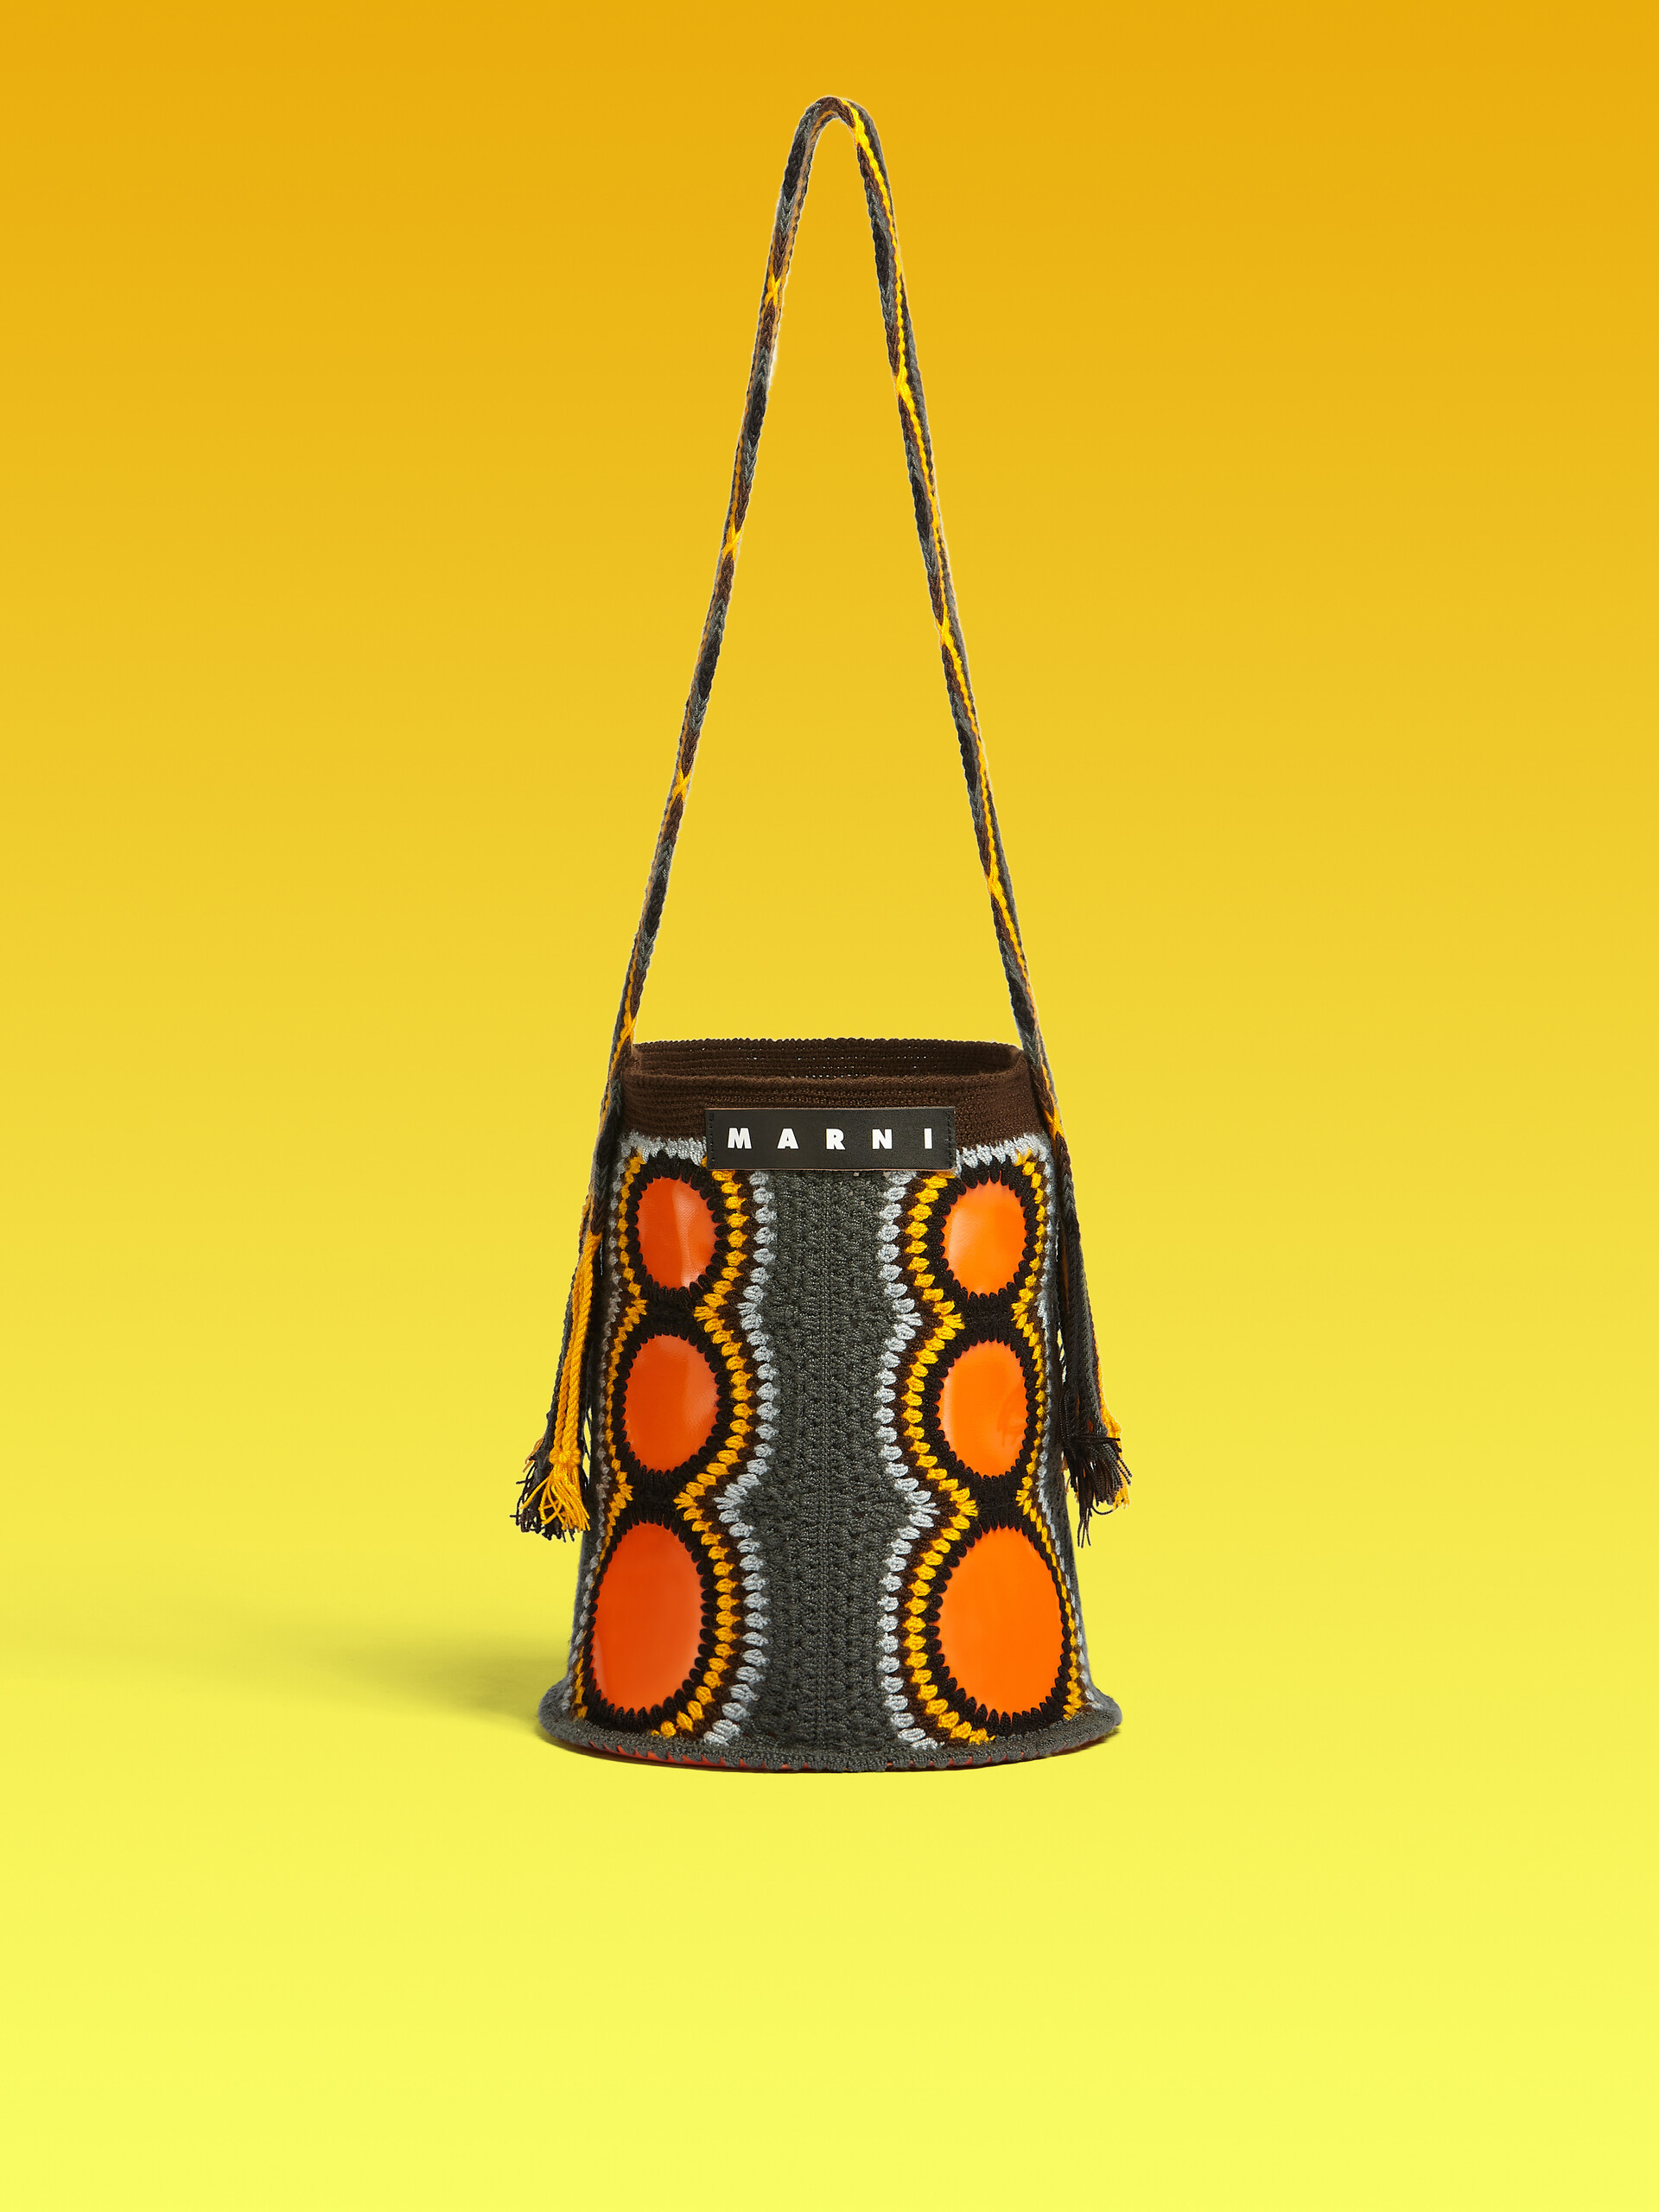 MARNI MARKET bag in green and orange technical wool - Bags - Image 1